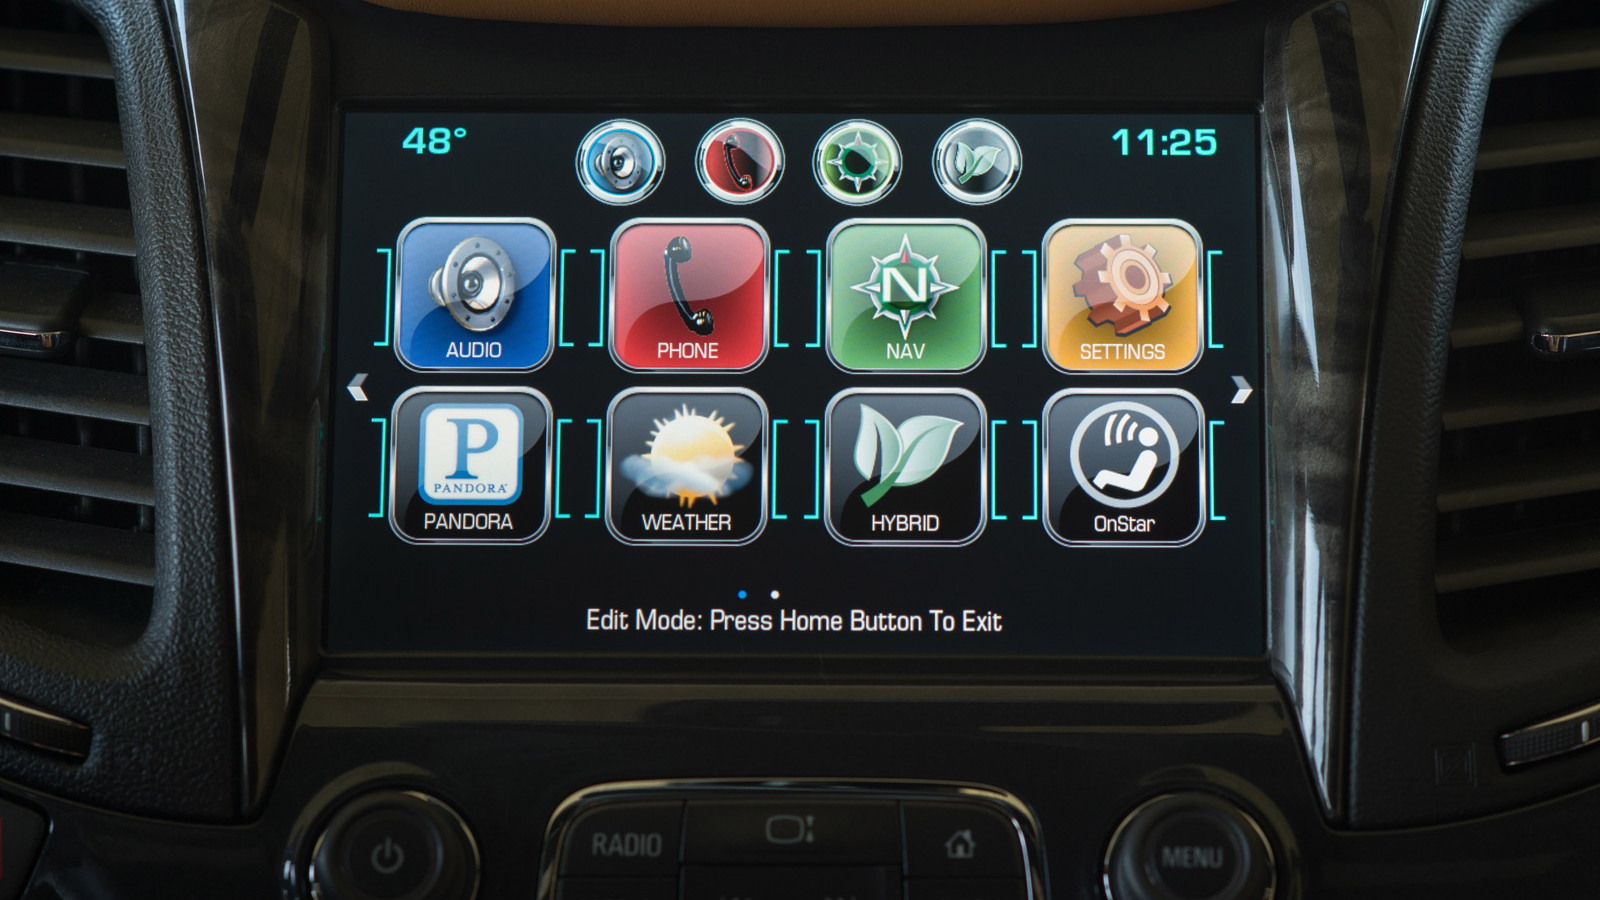 Chevrolet MyLink in the 2014 Impala